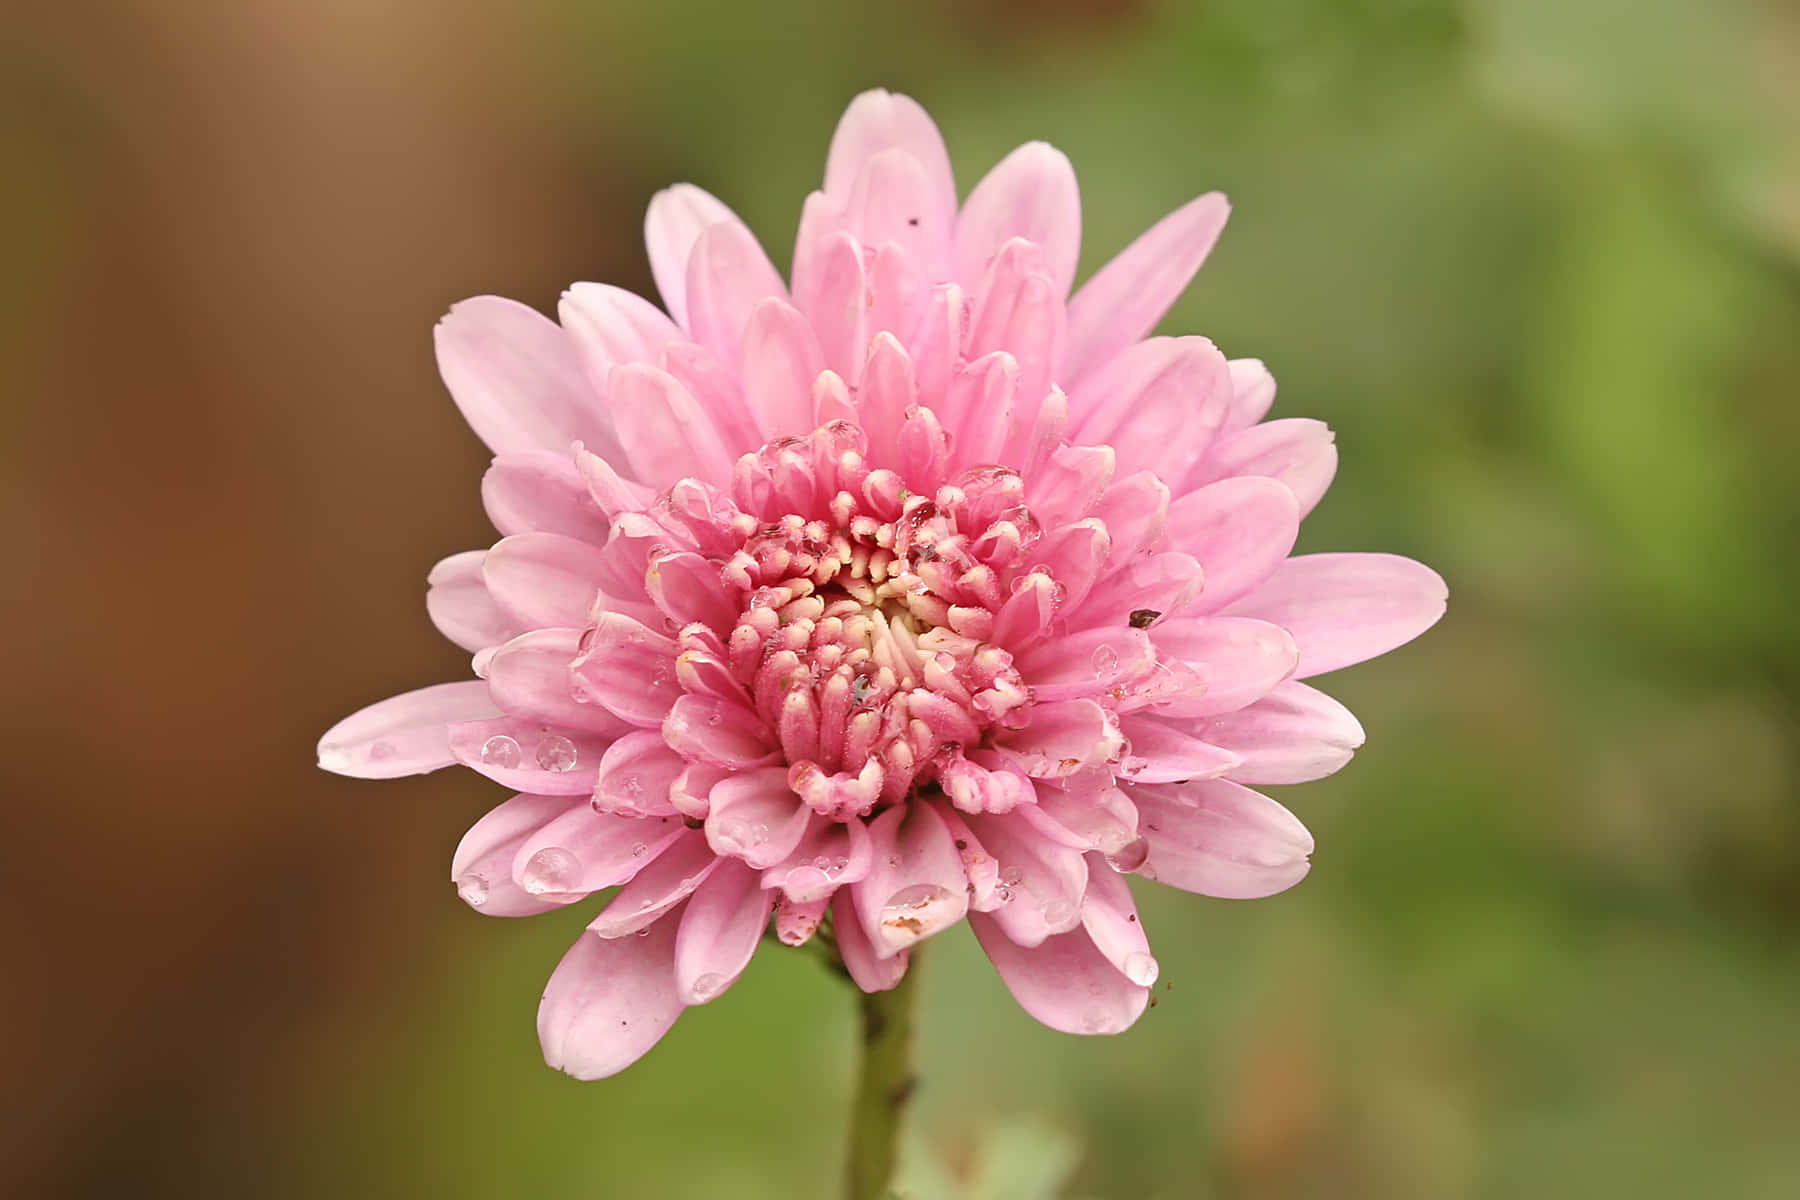 A Pink Flower With A Green Background